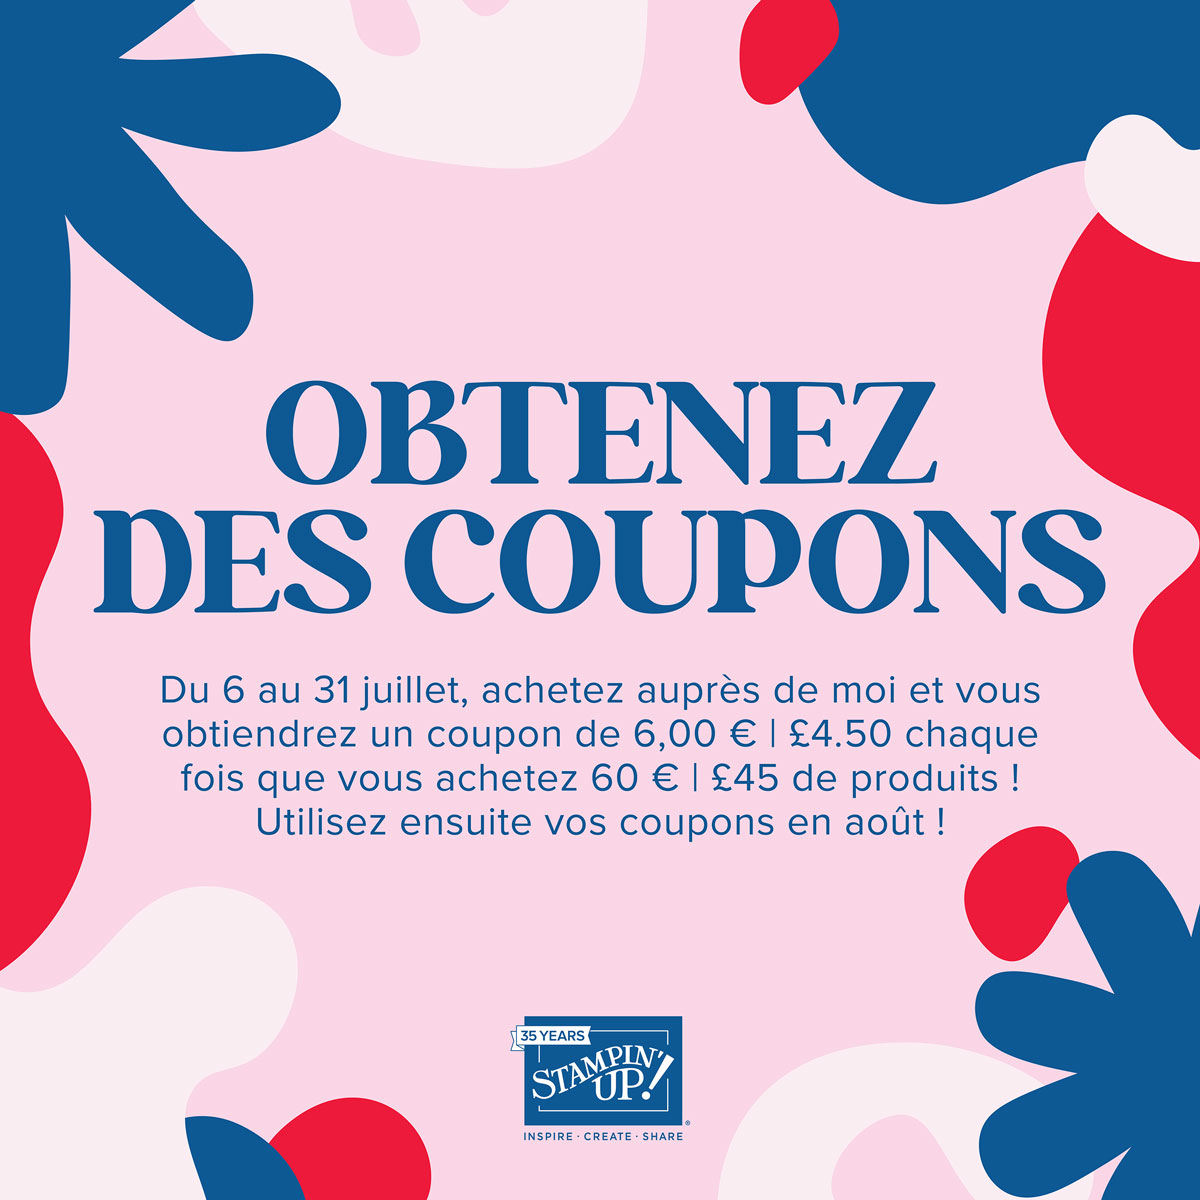 Stampin'Up! Promotion - Les Jours Gagnants 3